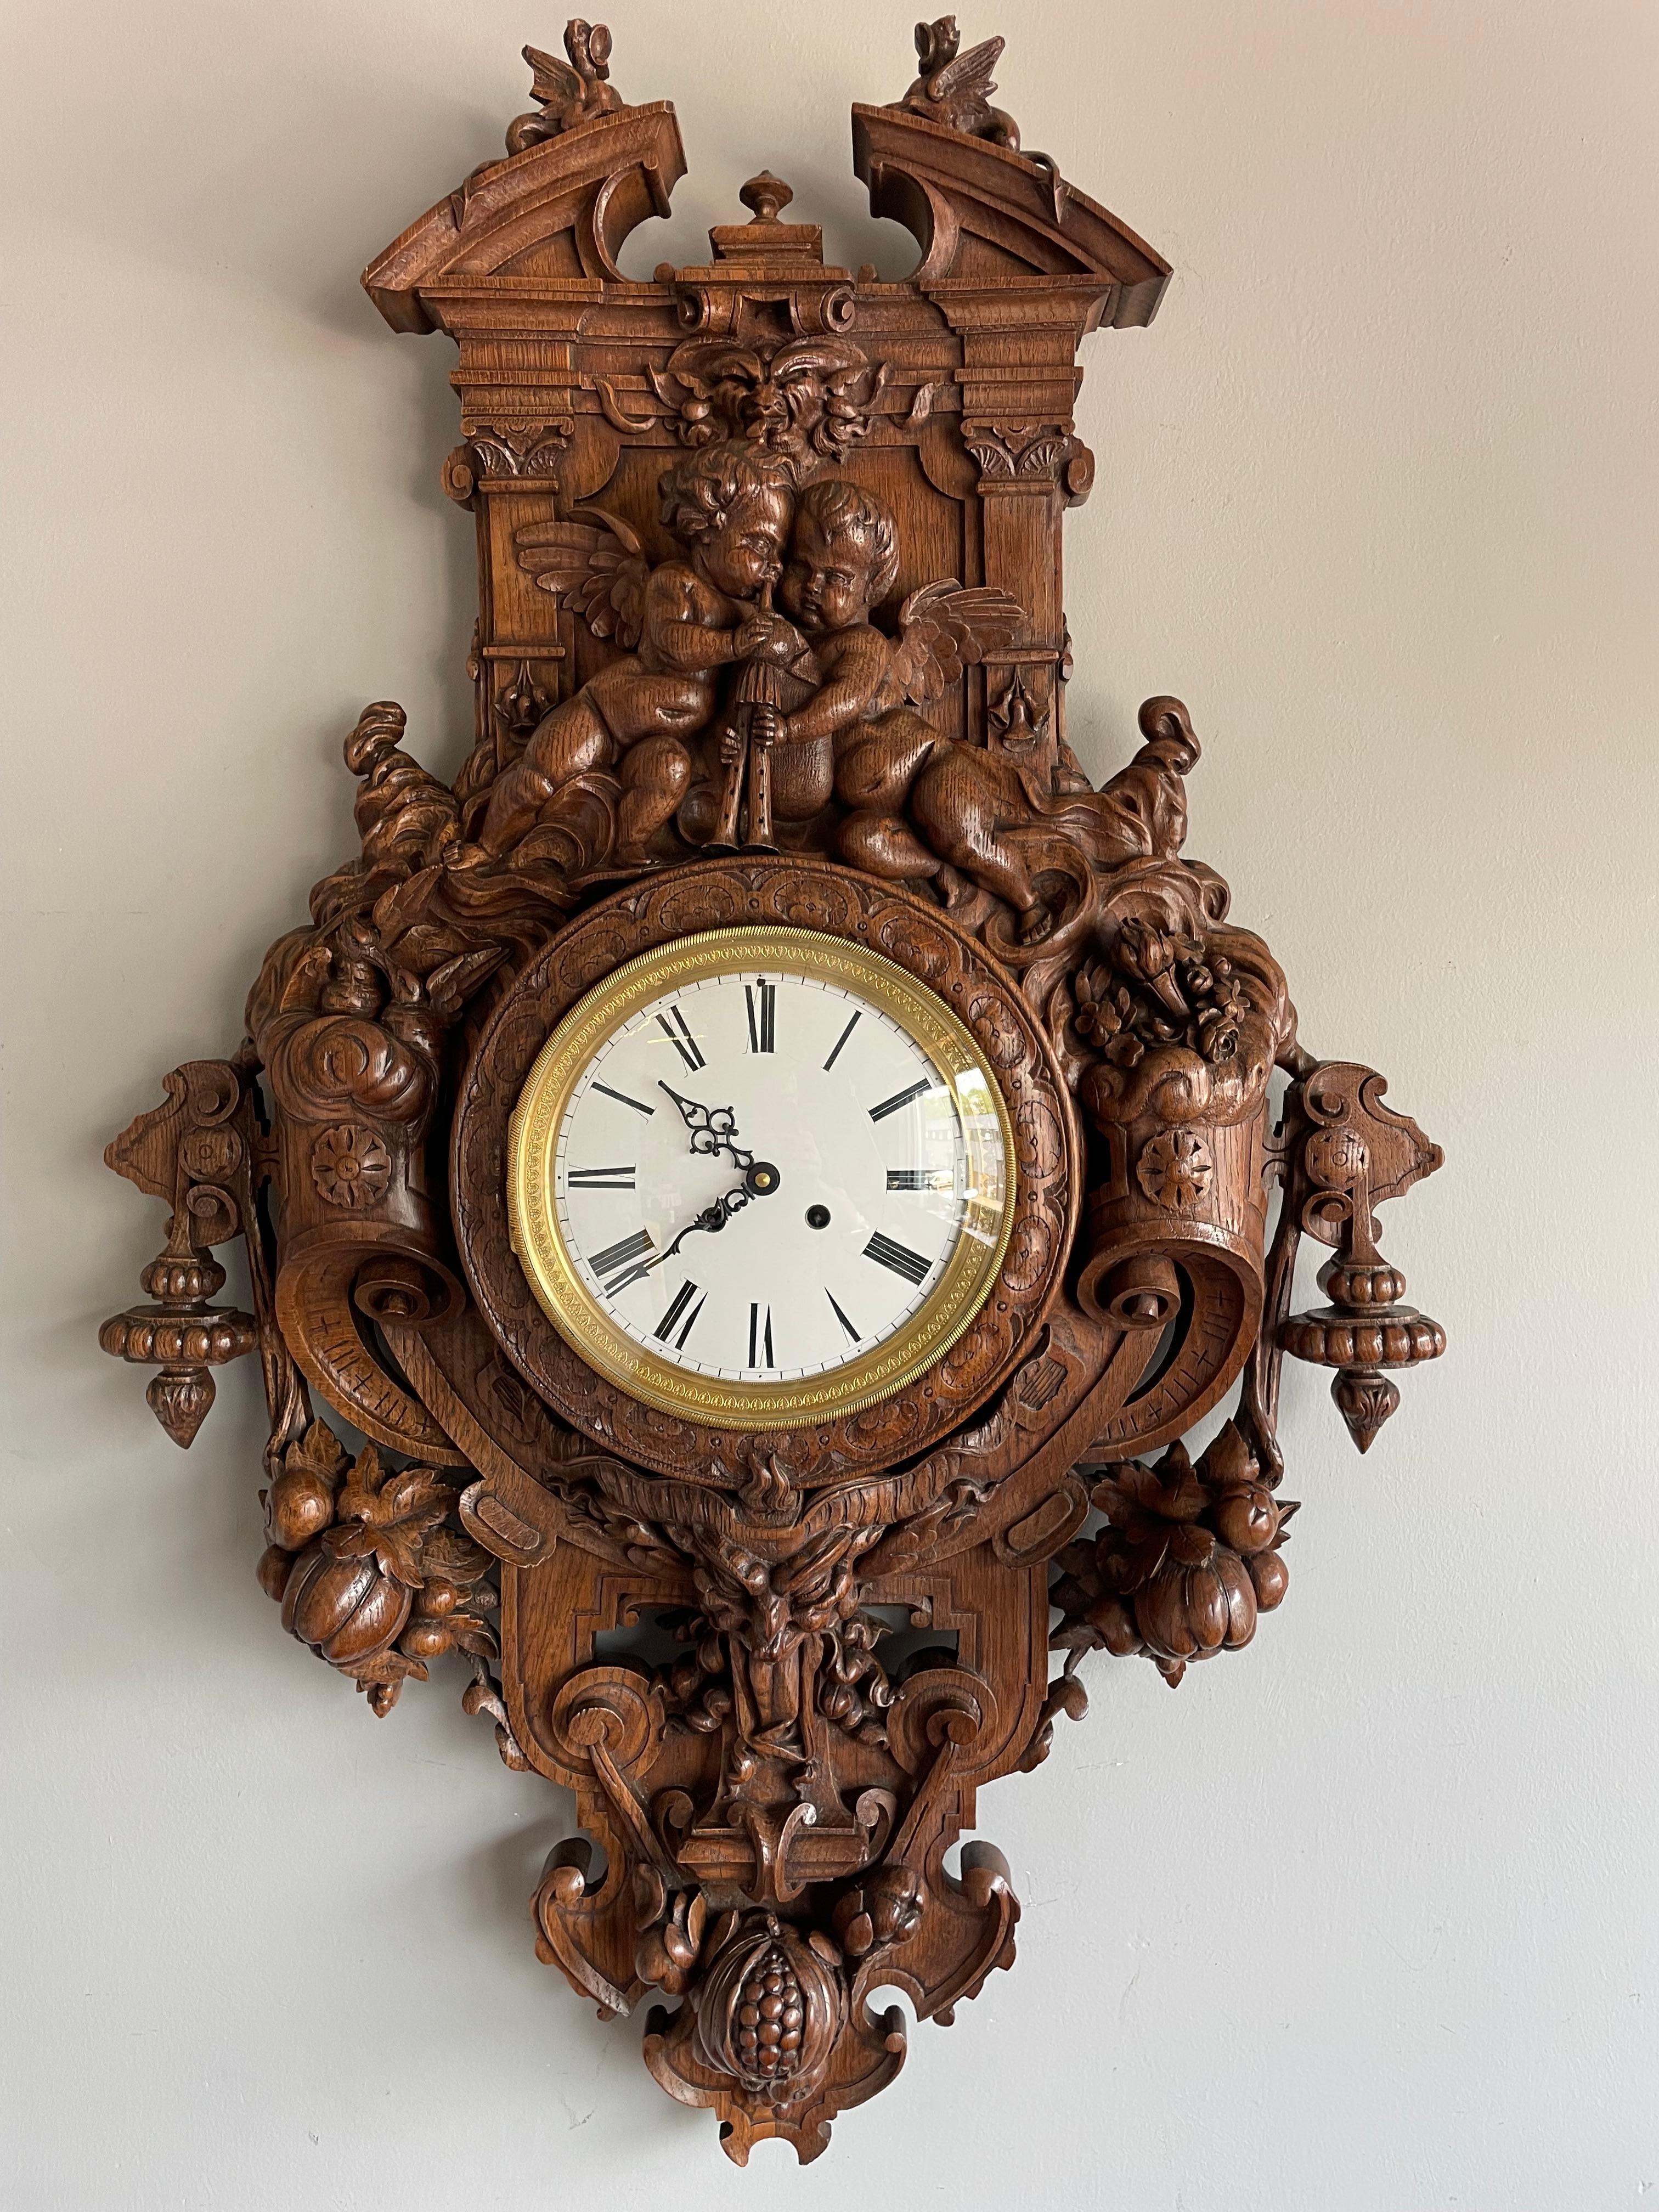 Antique & Huge Hand Carved Wall Clock by Parisian Top Makers Guéret Frères 1860s For Sale 12